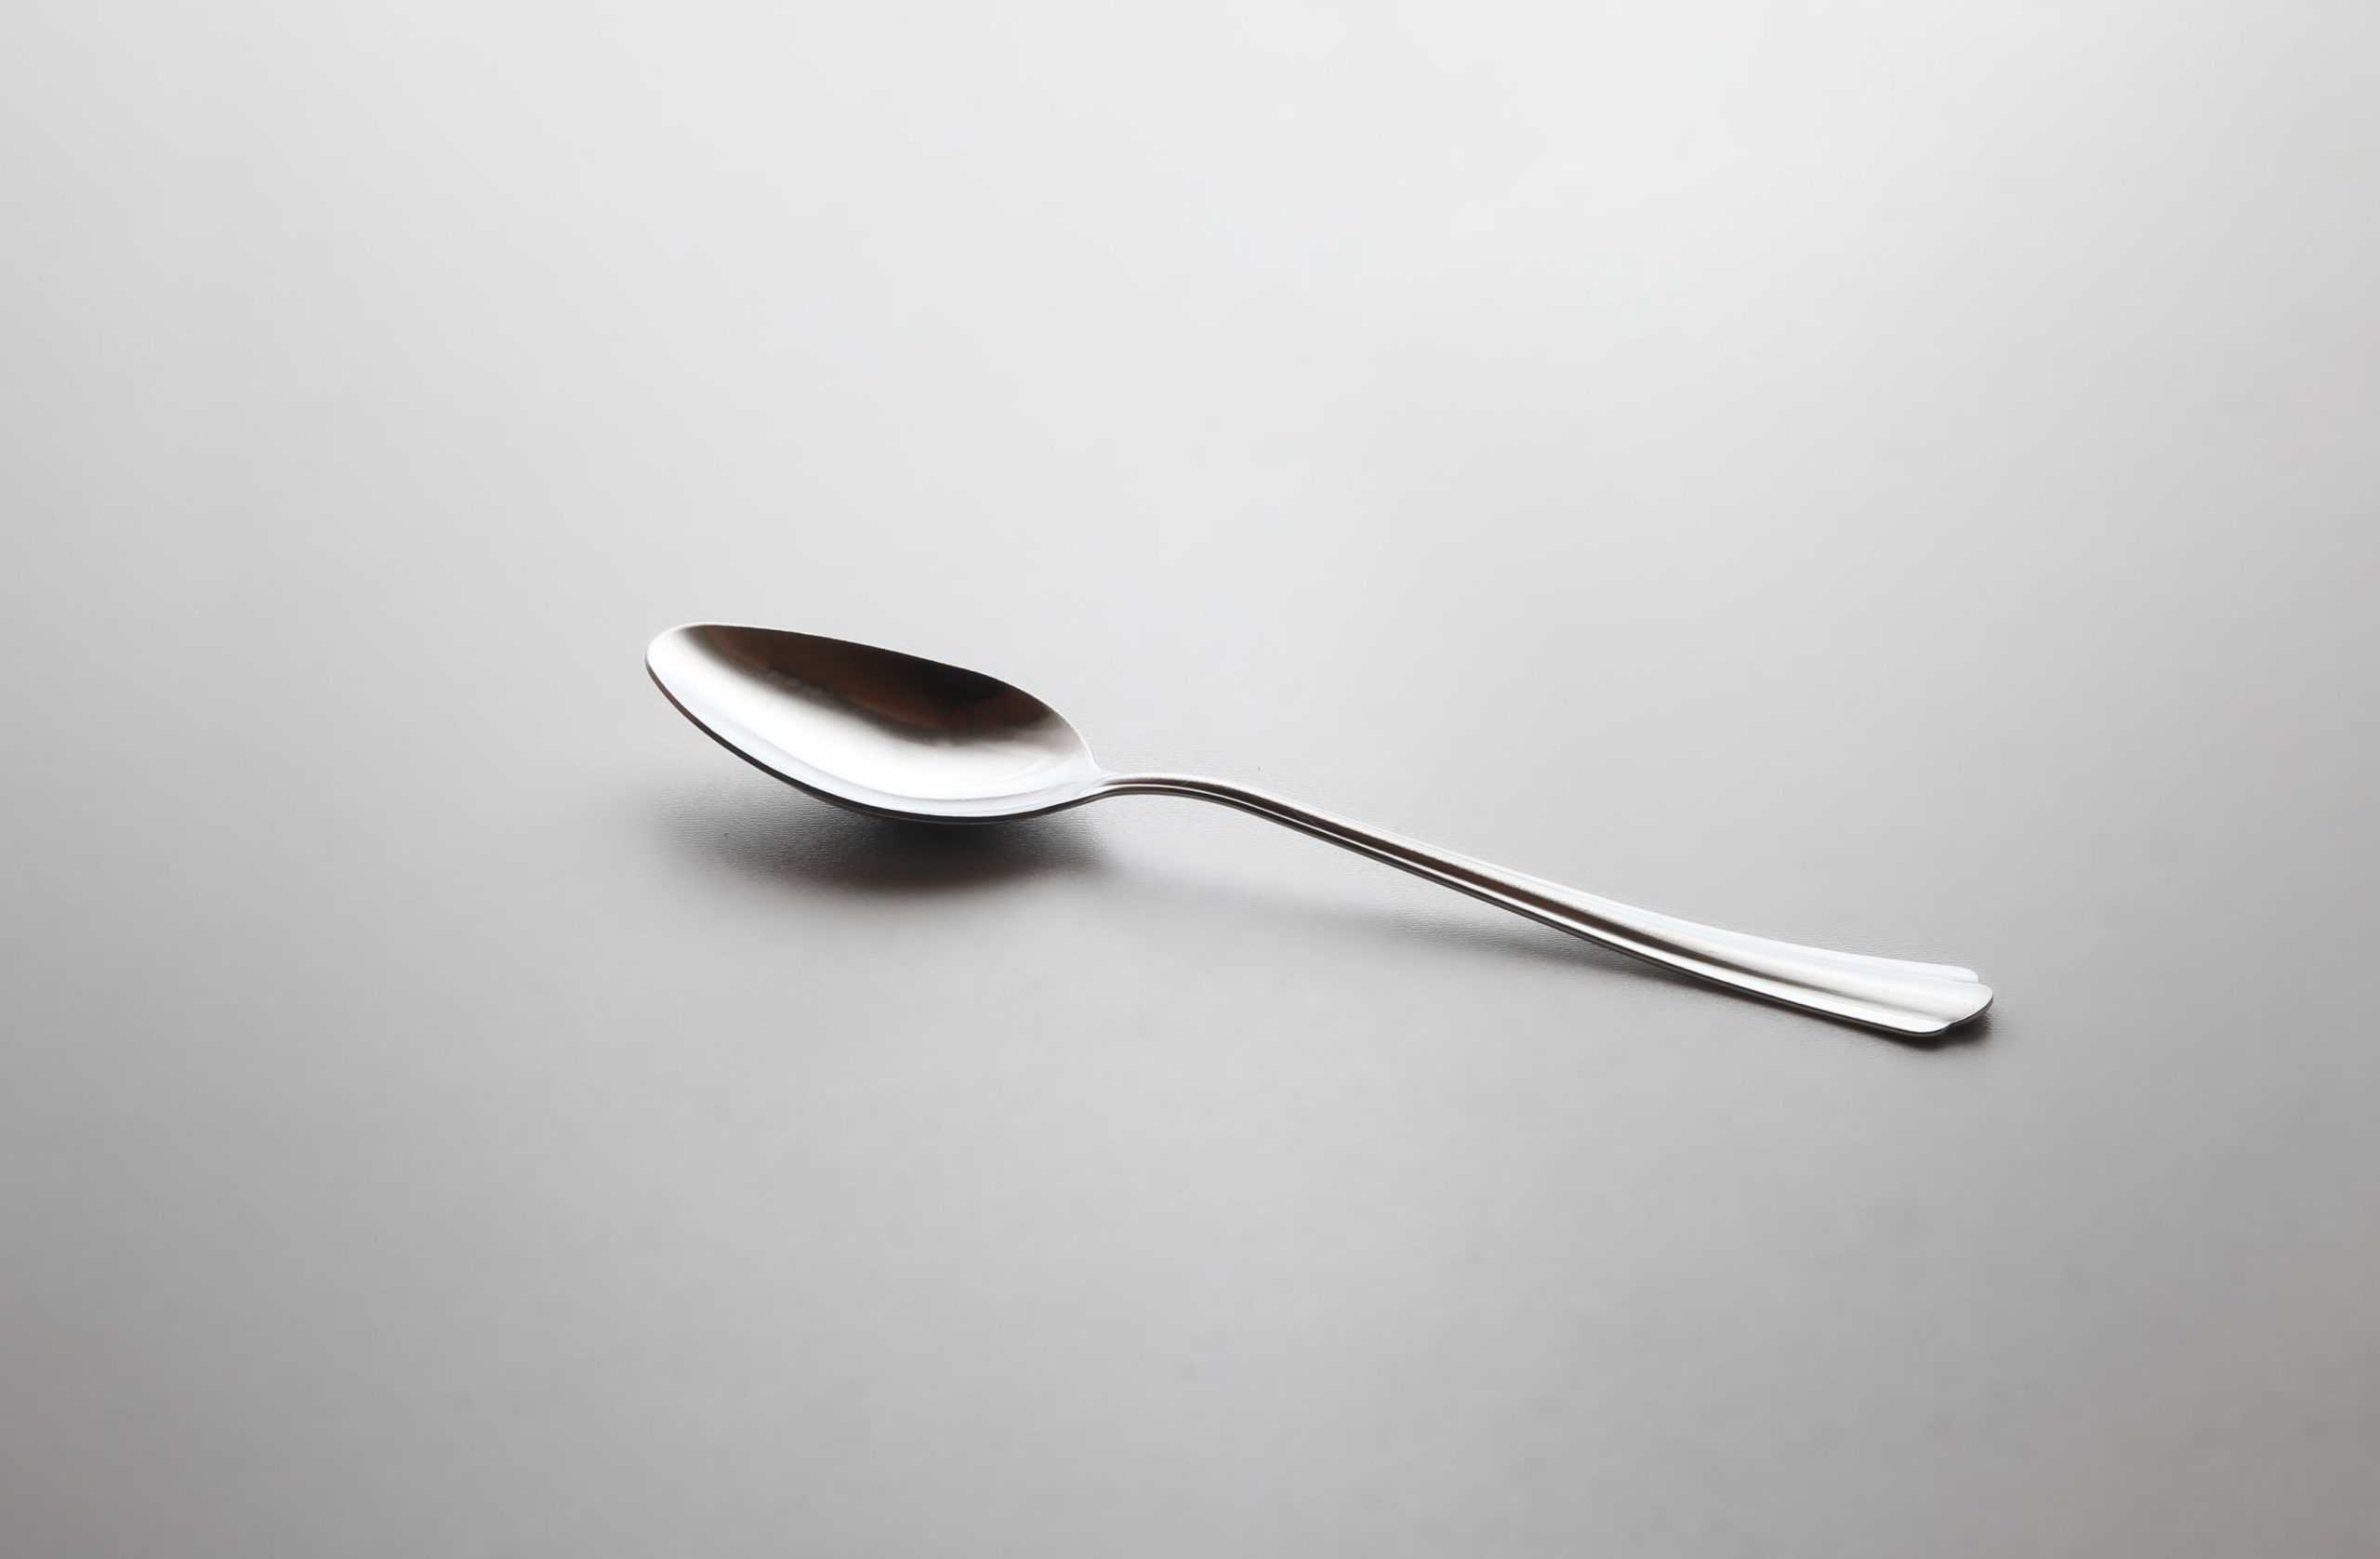 How to bend a spoon